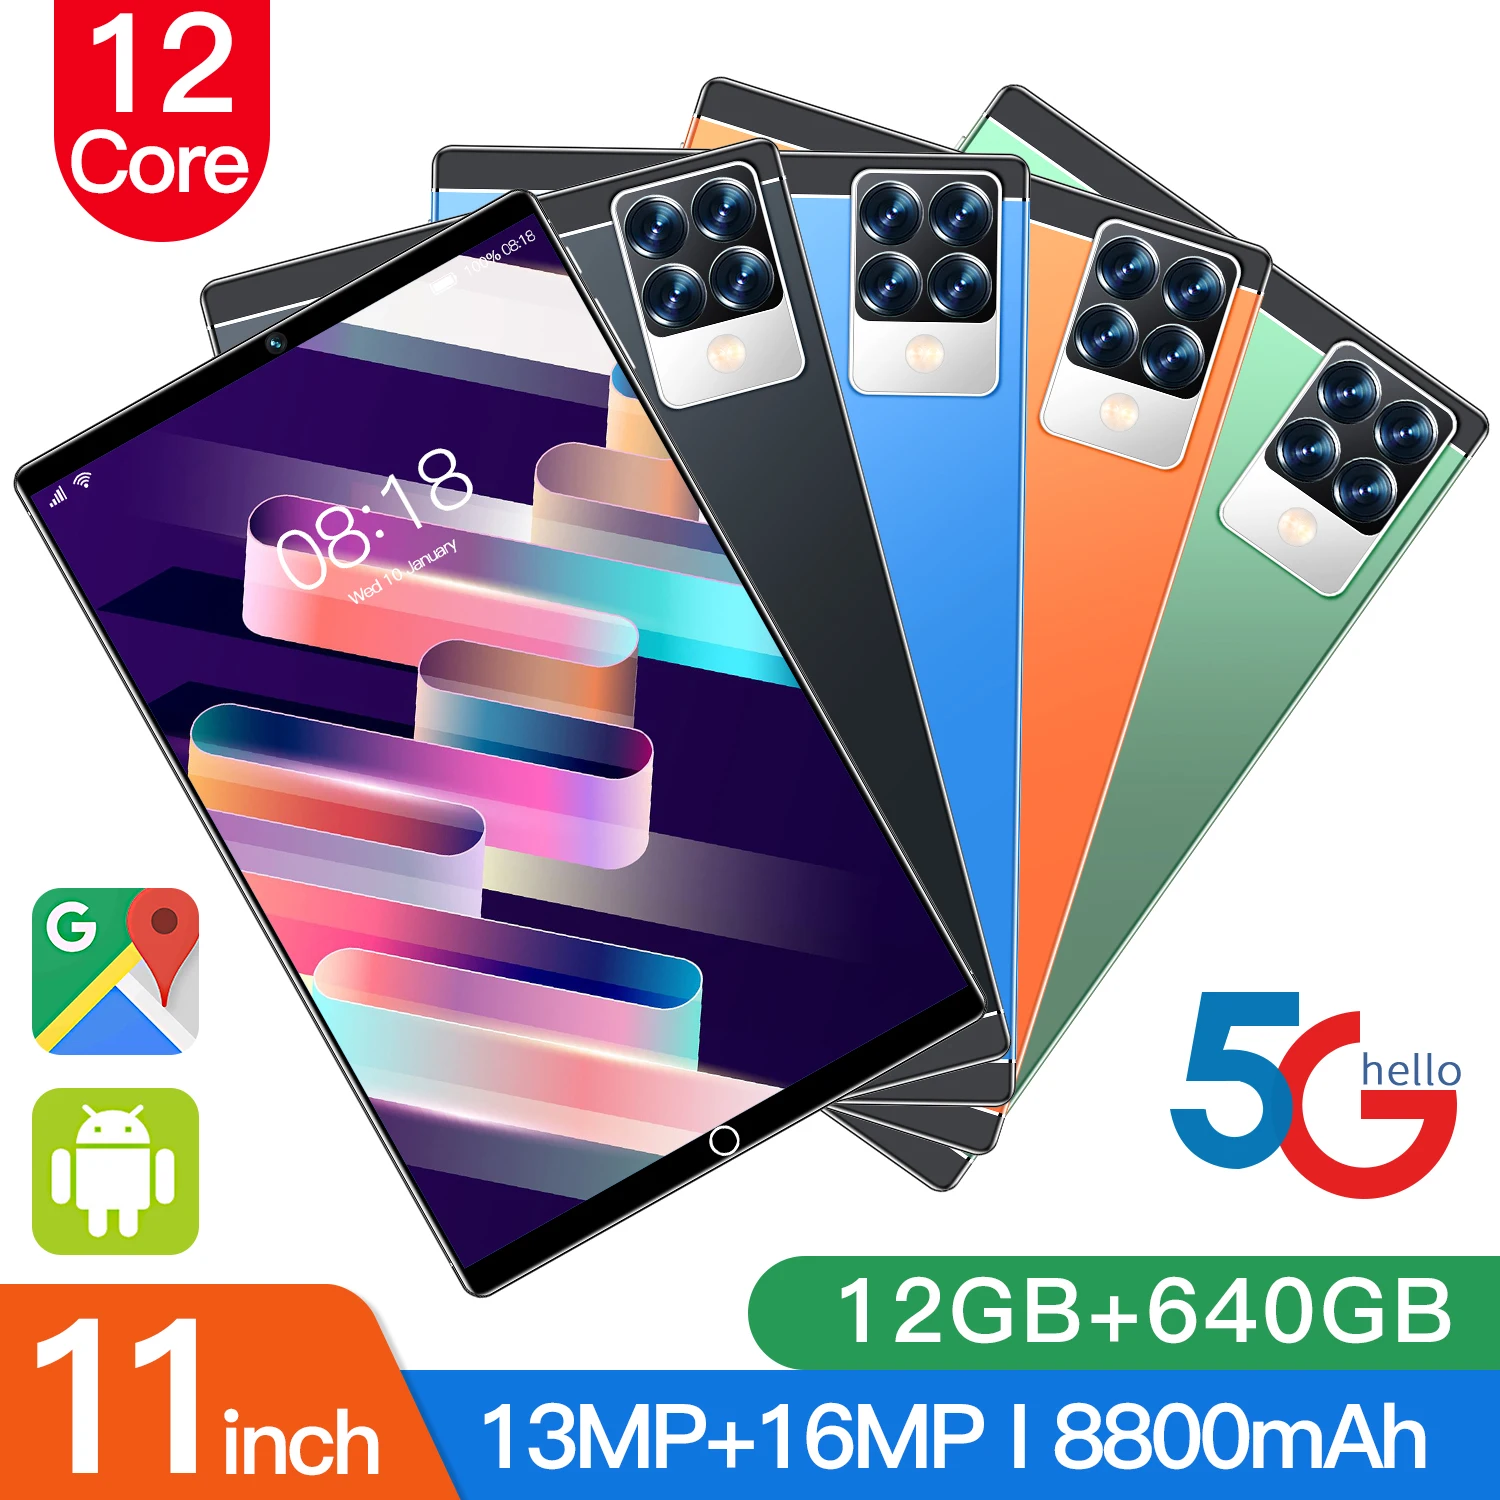 

New 11 inch High-end Tablet 12GB 640 GB Android 12 Dual SIM Dual Camera Rear 5.0MP IPS Bluetooth WiFi Cheap Tablets Free Shippin